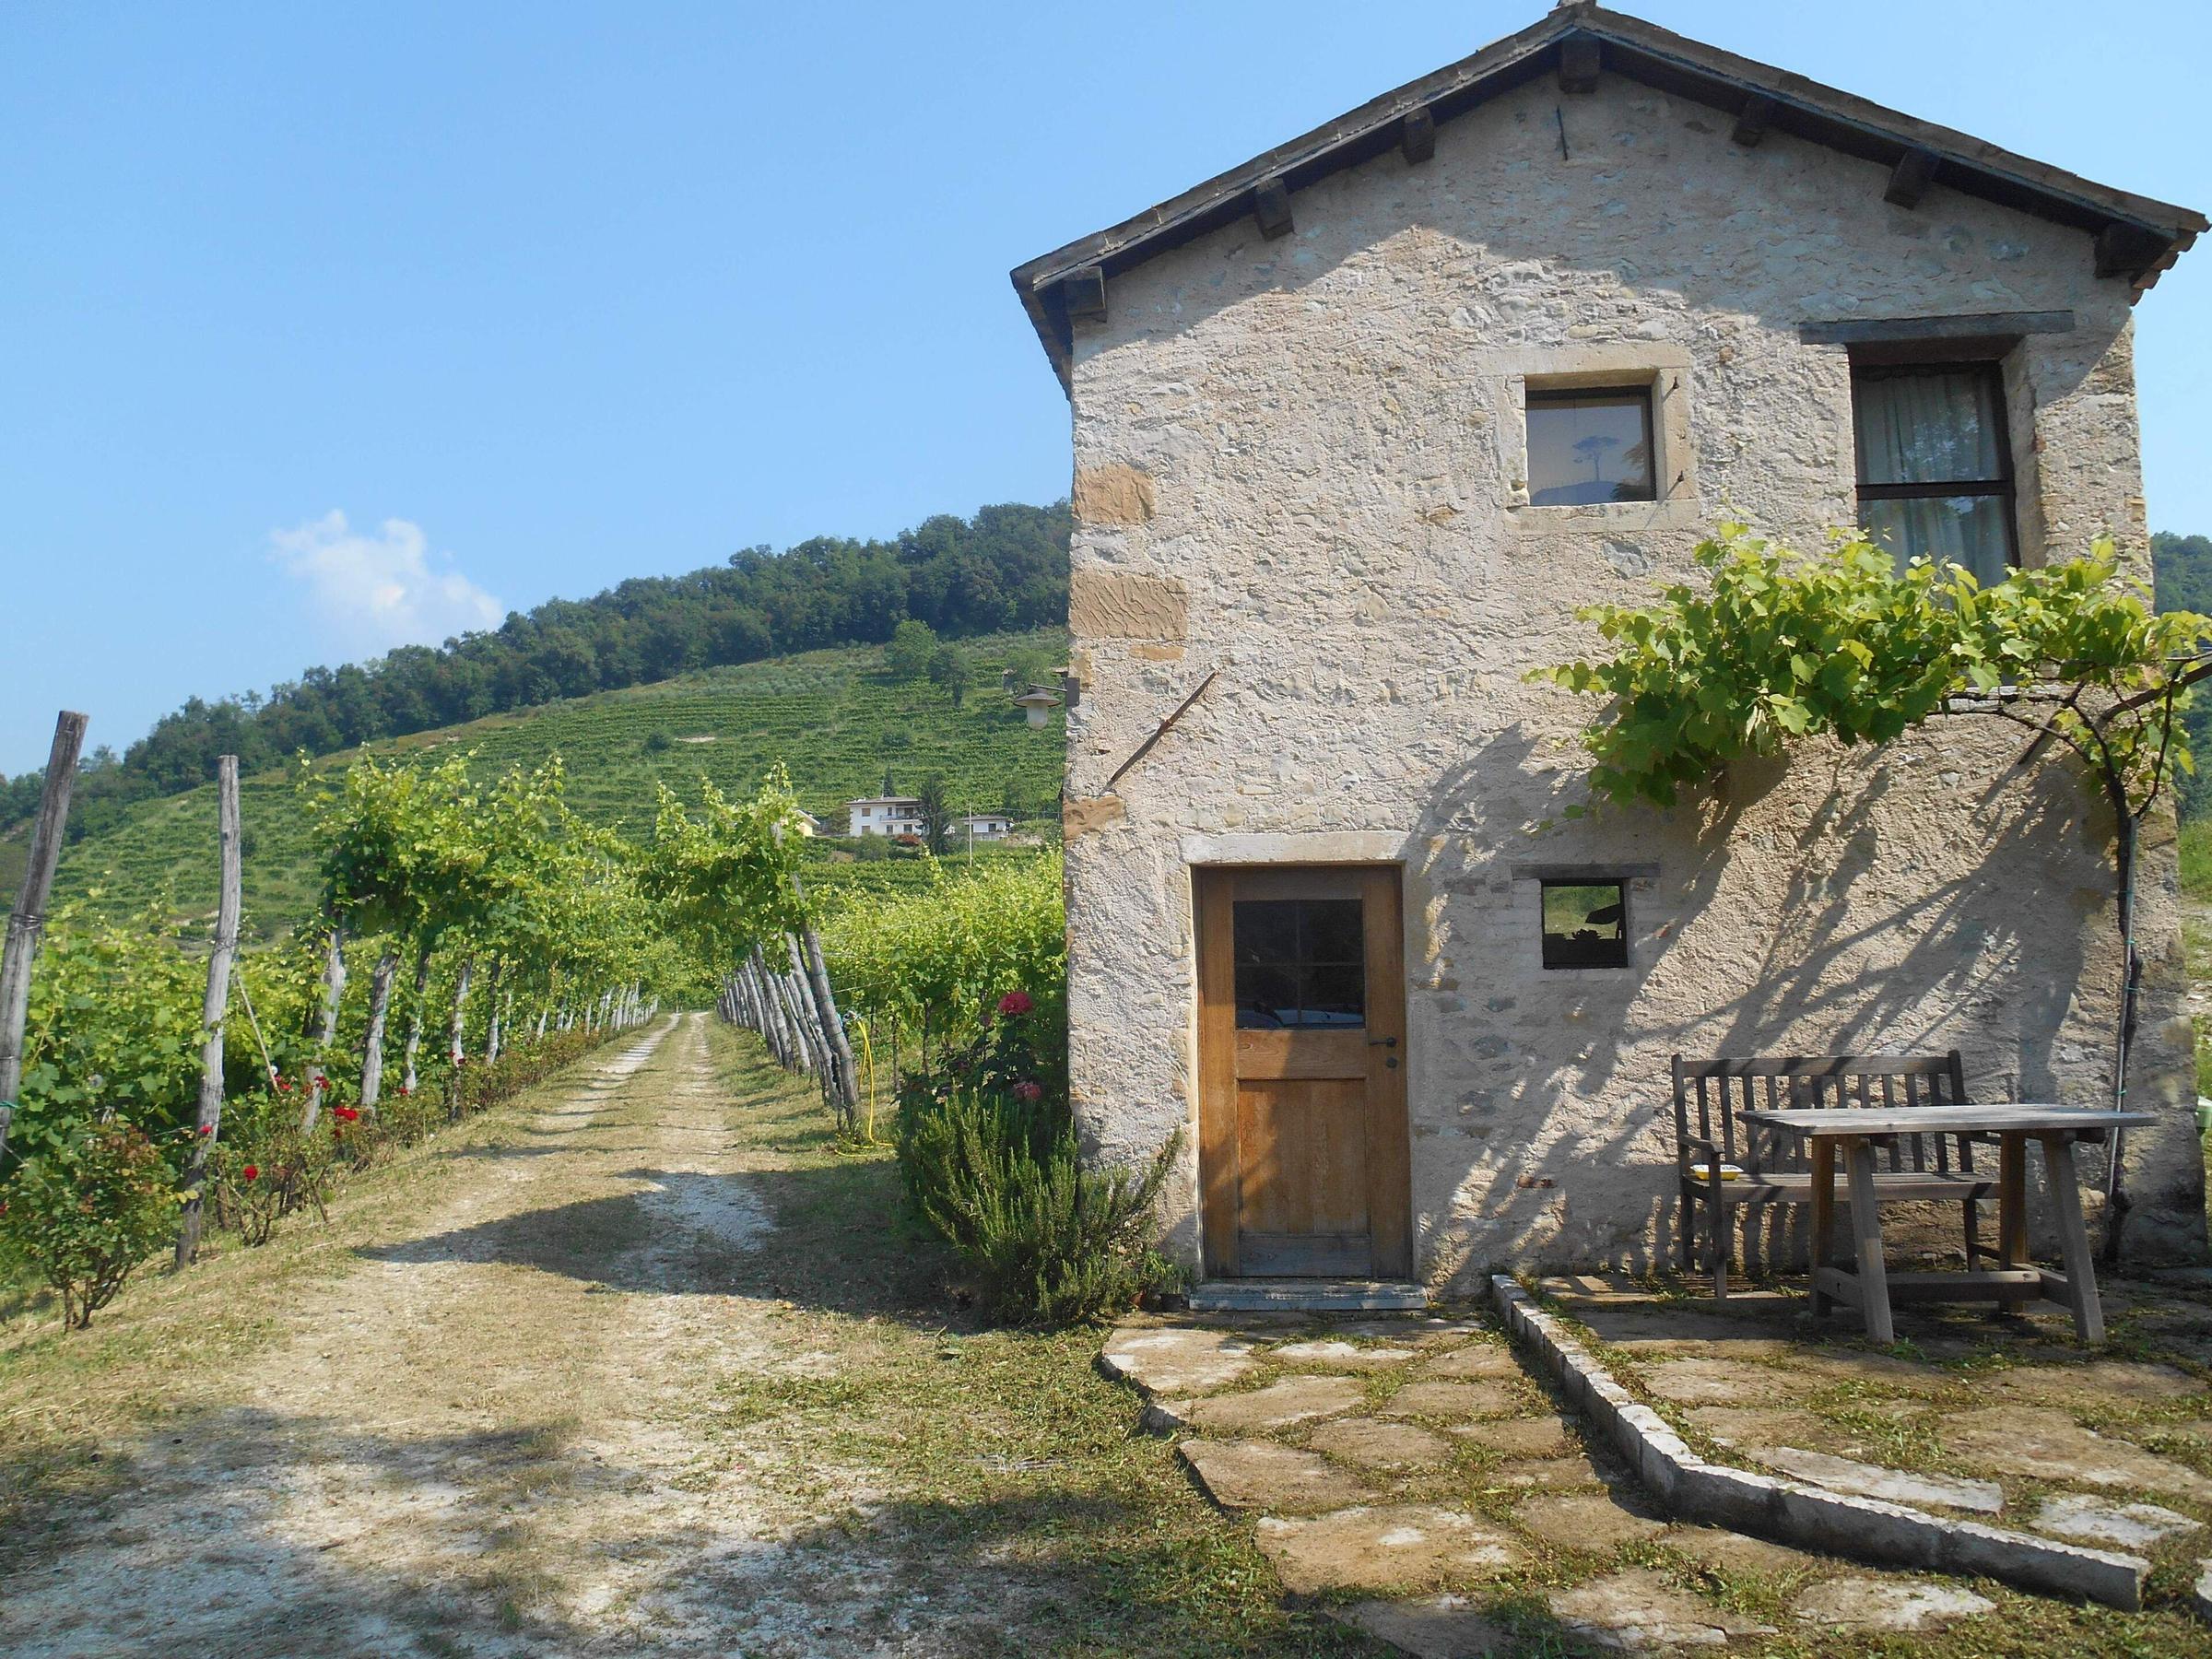 Pet Friendly Cottage in the Heart of the Prosecco Hills